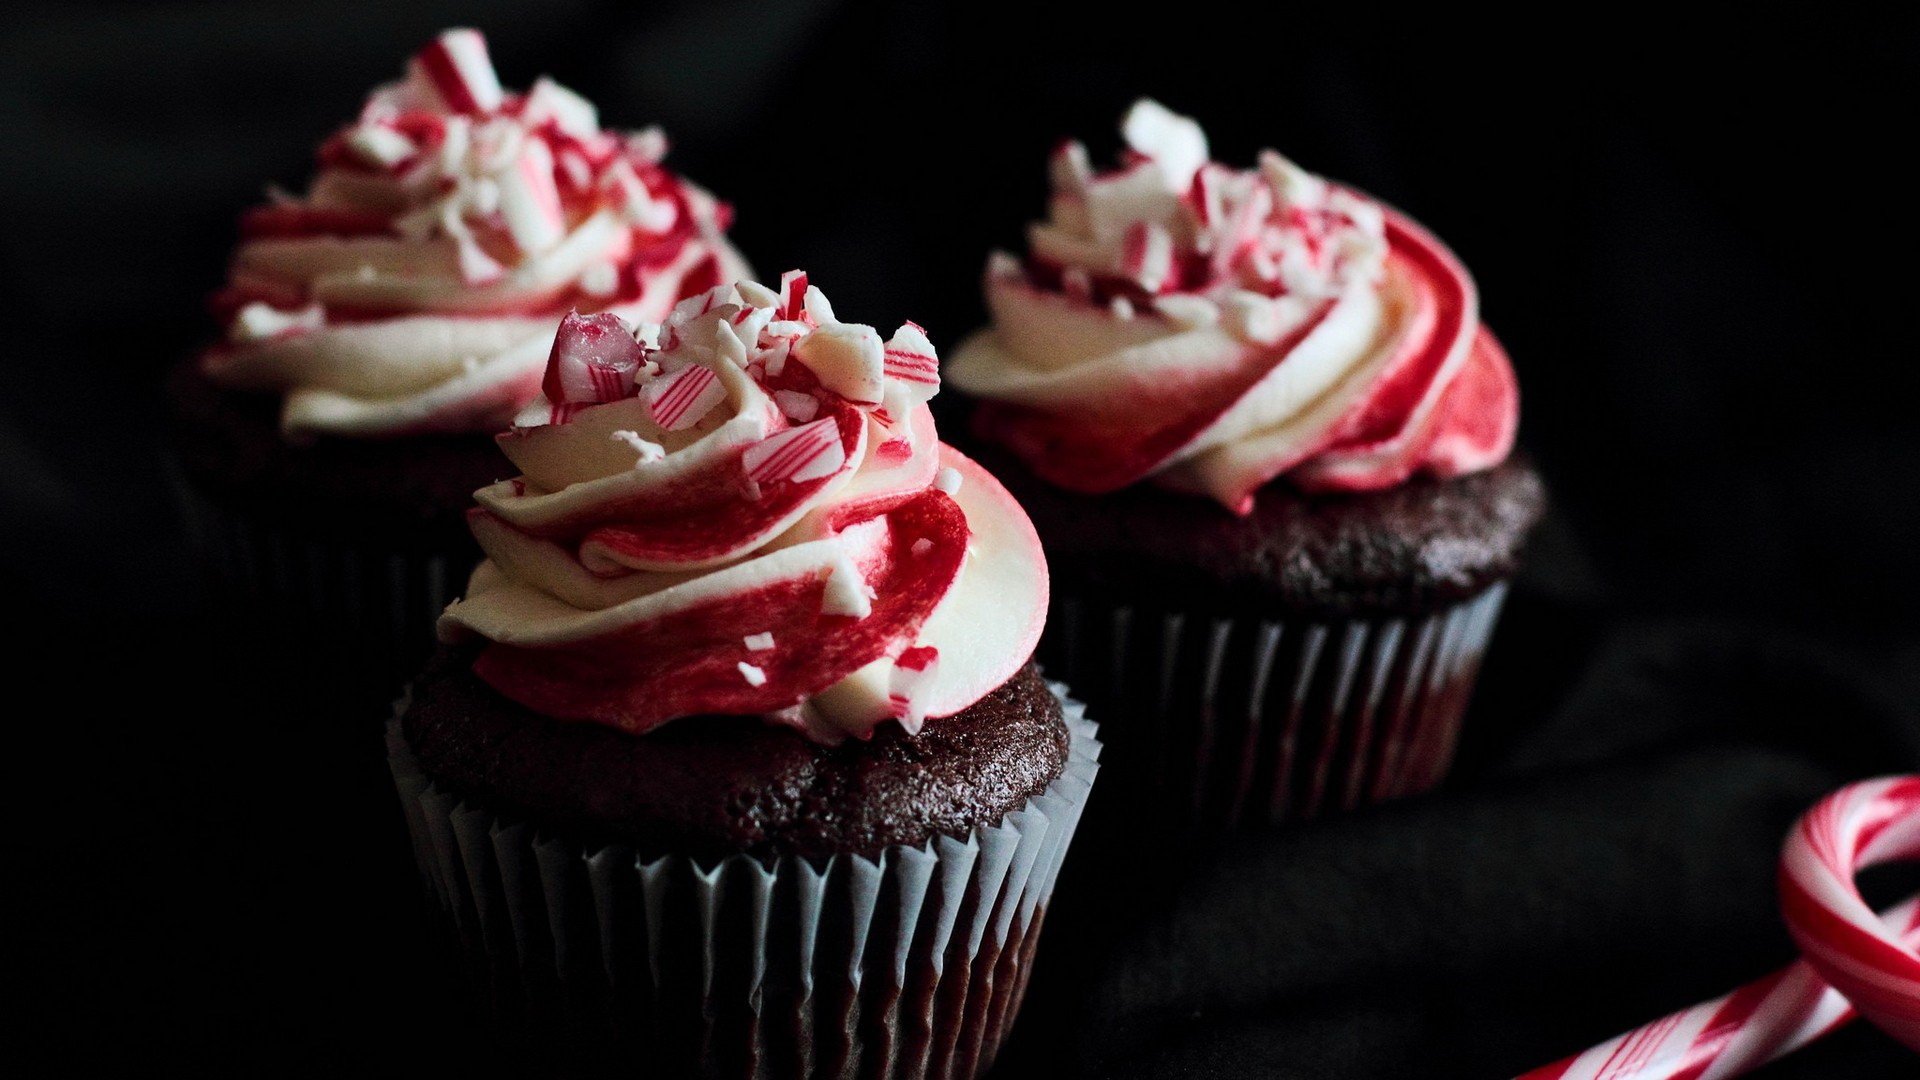 Cupcakes With Candy Canes In Them - HD Wallpaper 